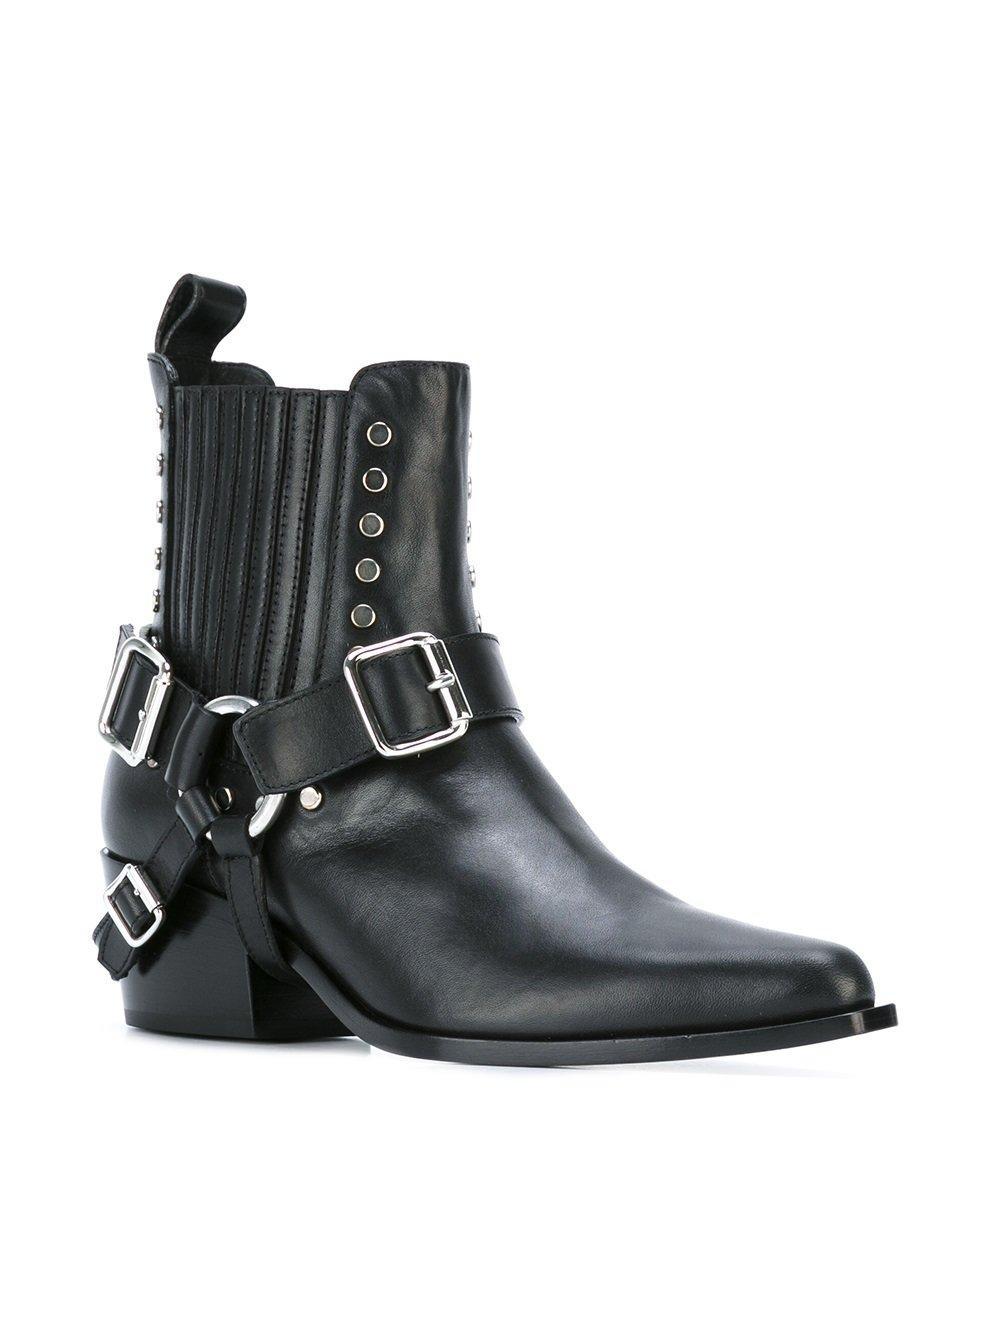 Lyst - Diesel Black Gold Buckled Ankle Boots in Black